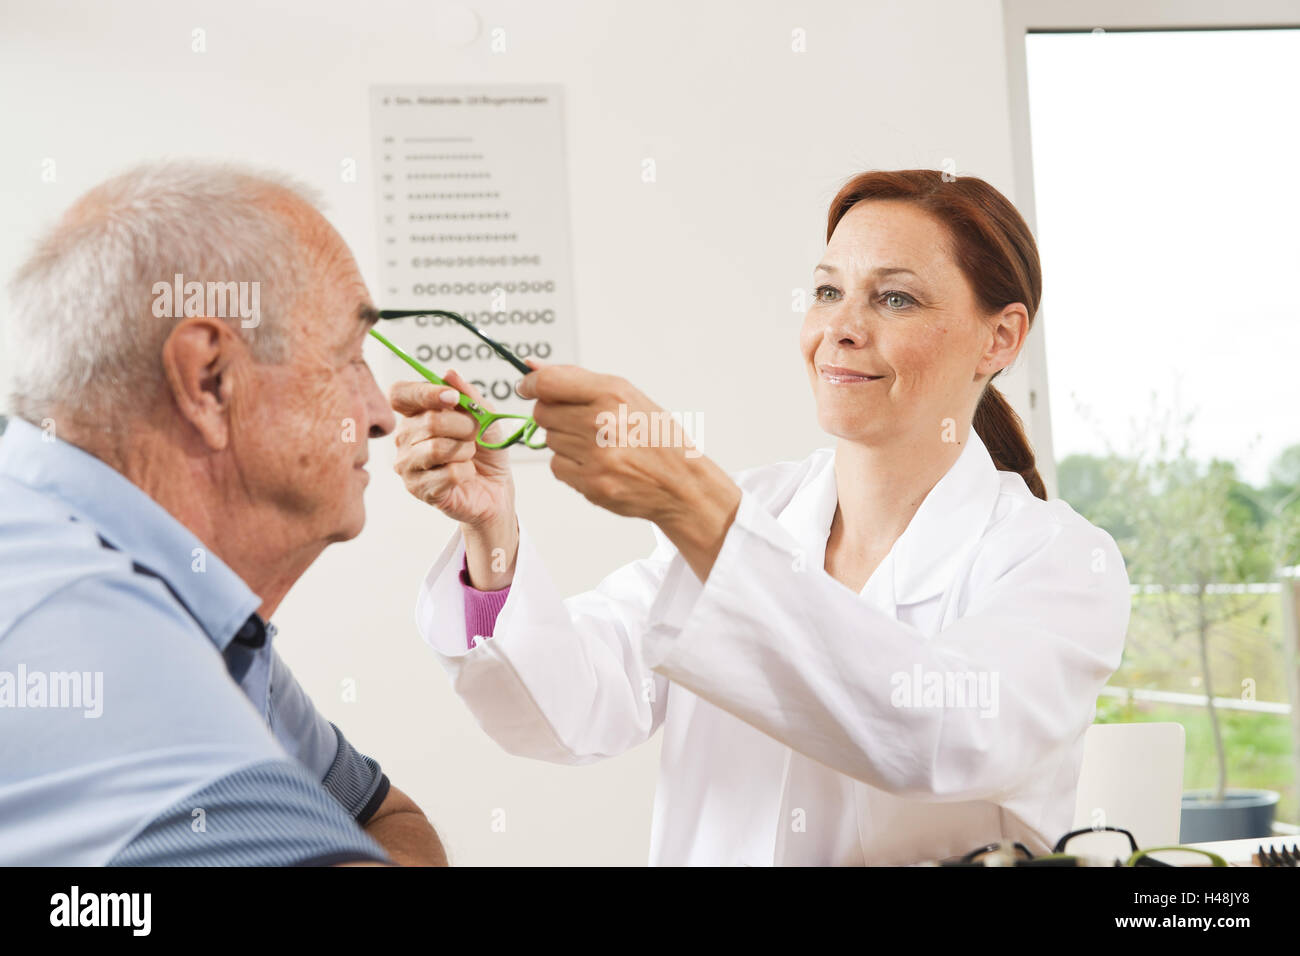 Boss will consult from his ophthalmologist, Stock Photo